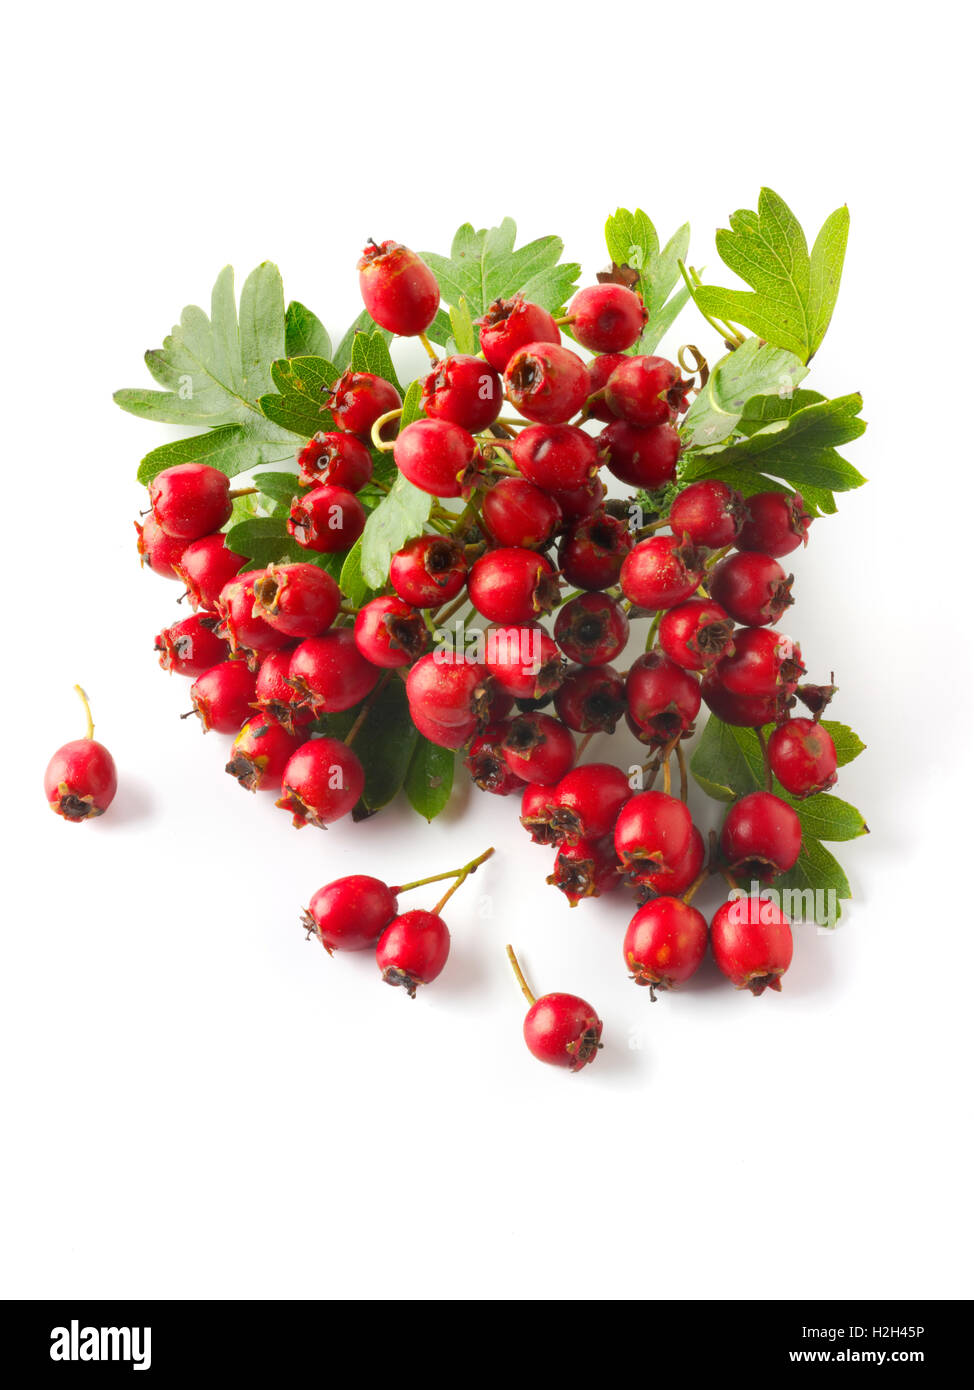 Fresh picked berries from a hawthorn, thornapple, May-tree, whitethorn, or hawberry bush (Crataegus) against white Stock Photo